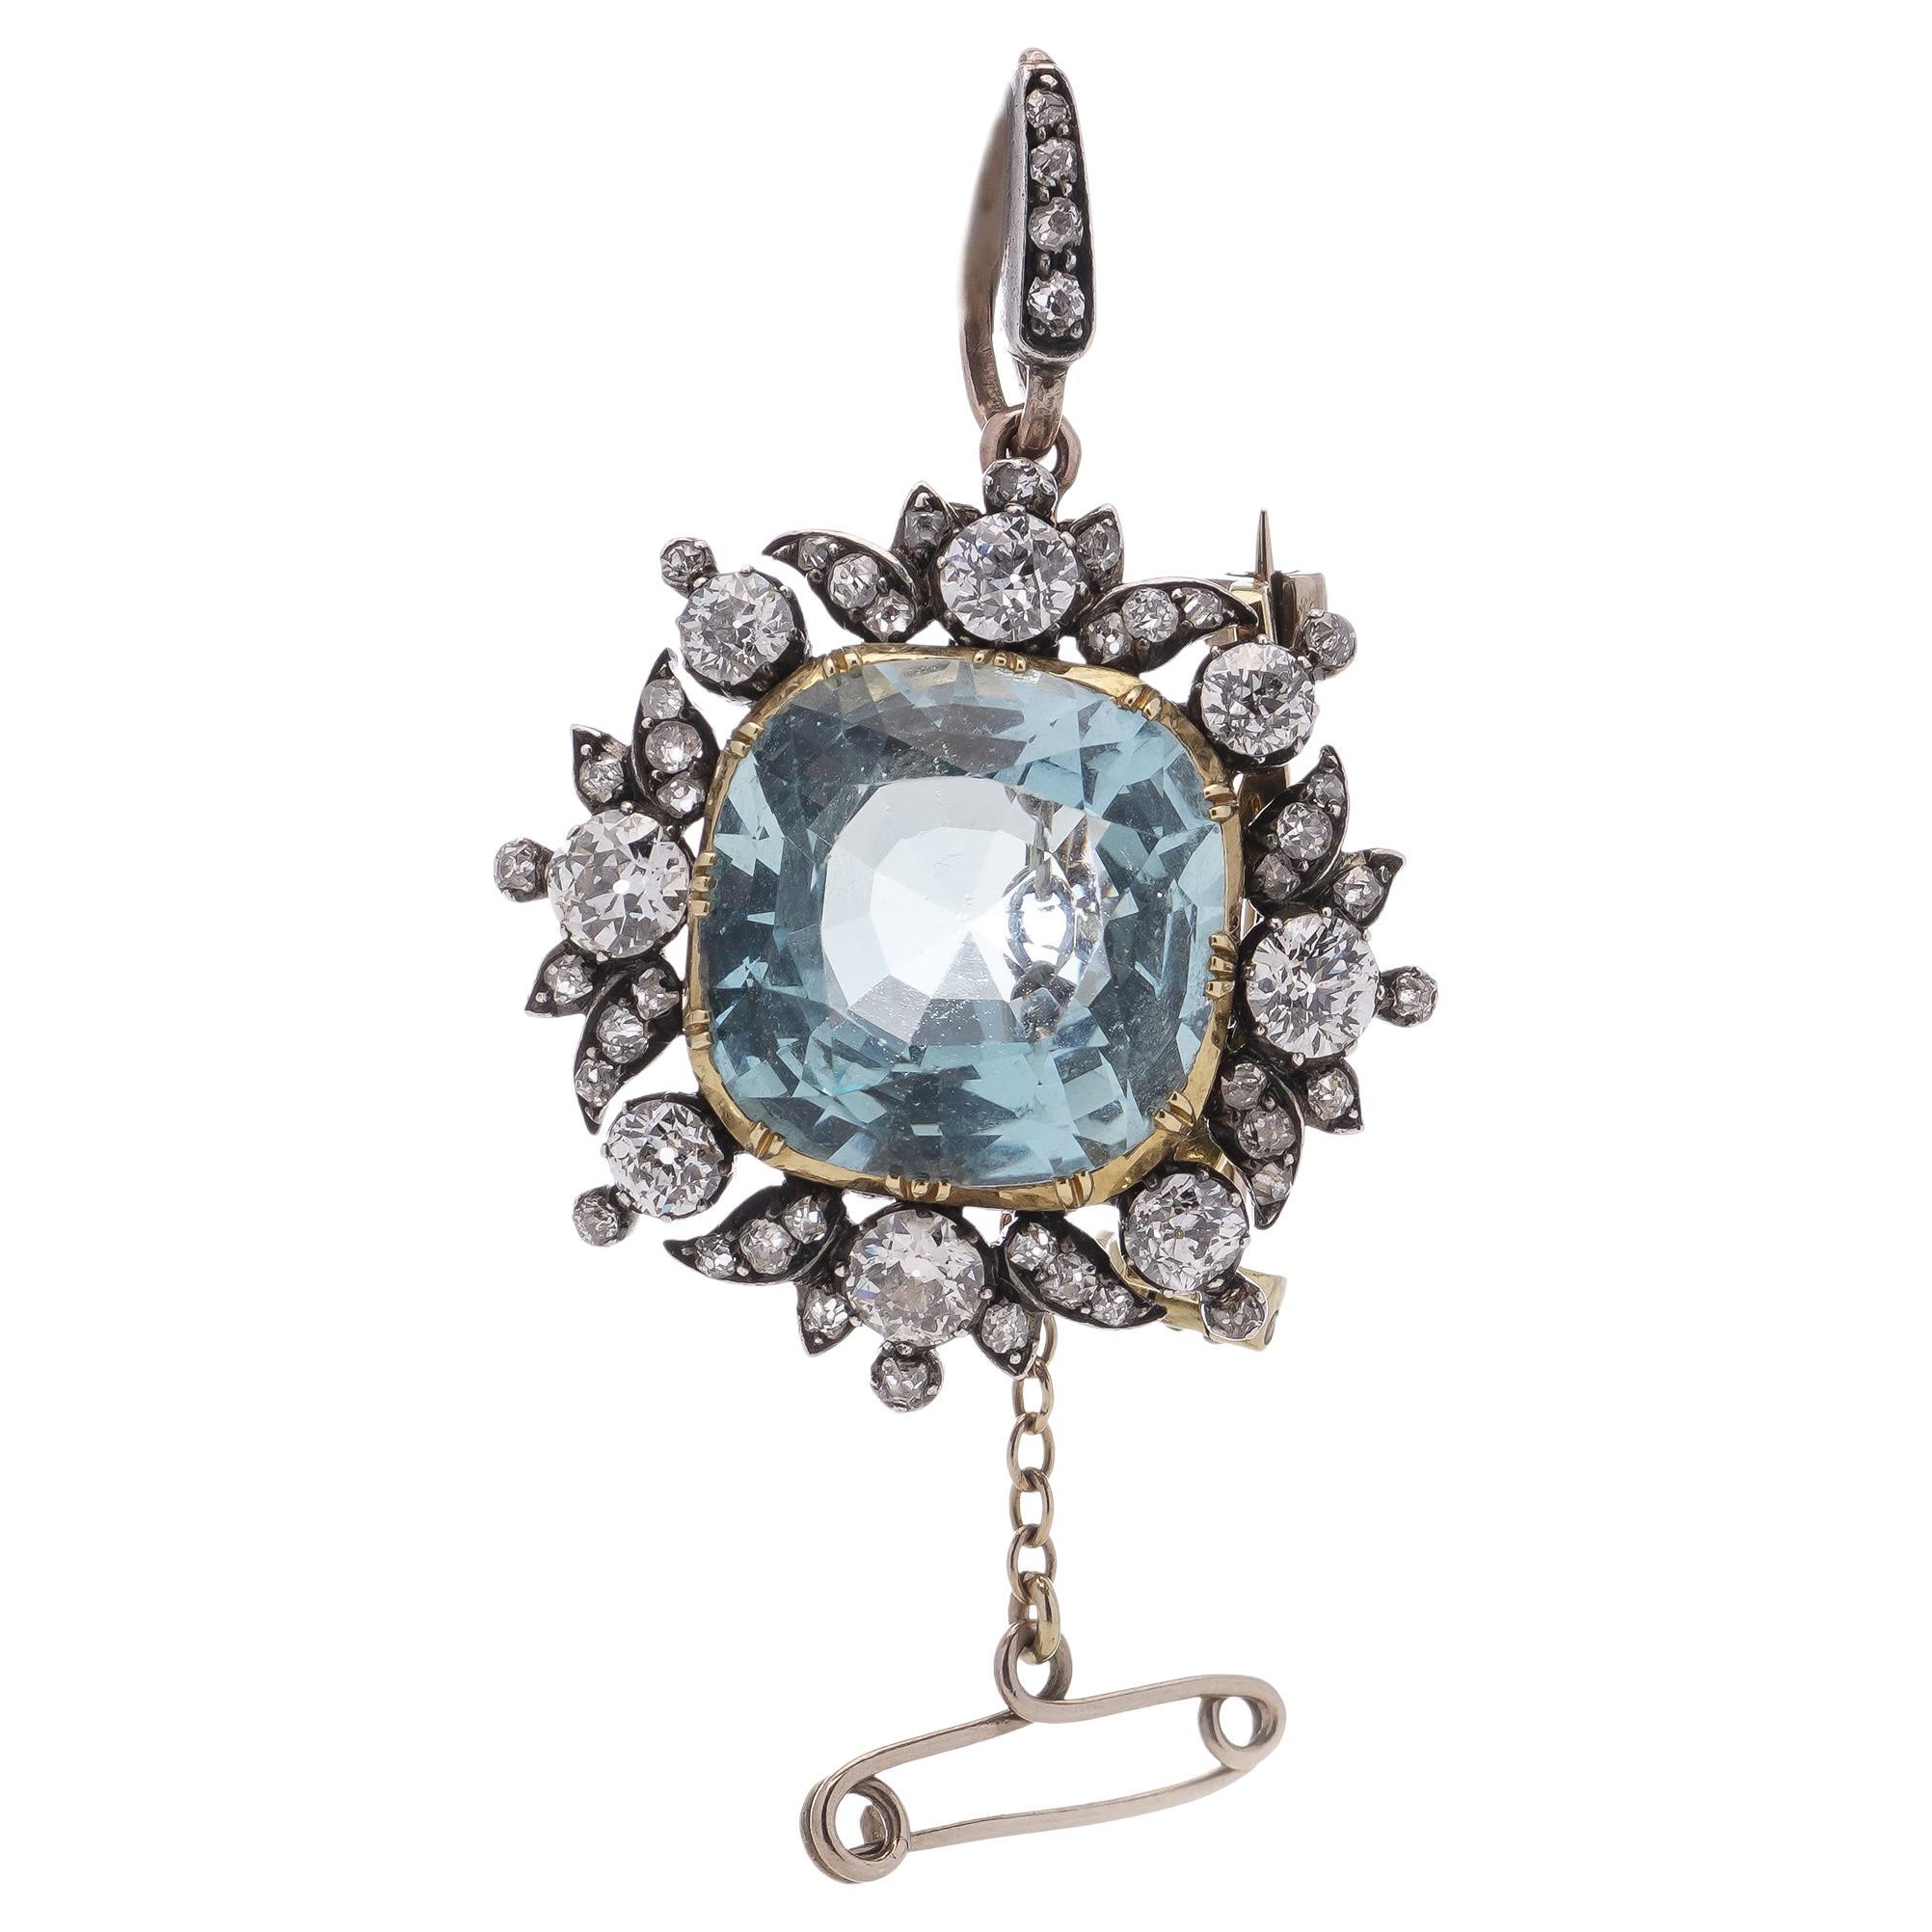 19th Century 9kt gold and silver 7.17 cts. of cushion-cut Aquamarine brooch For Sale